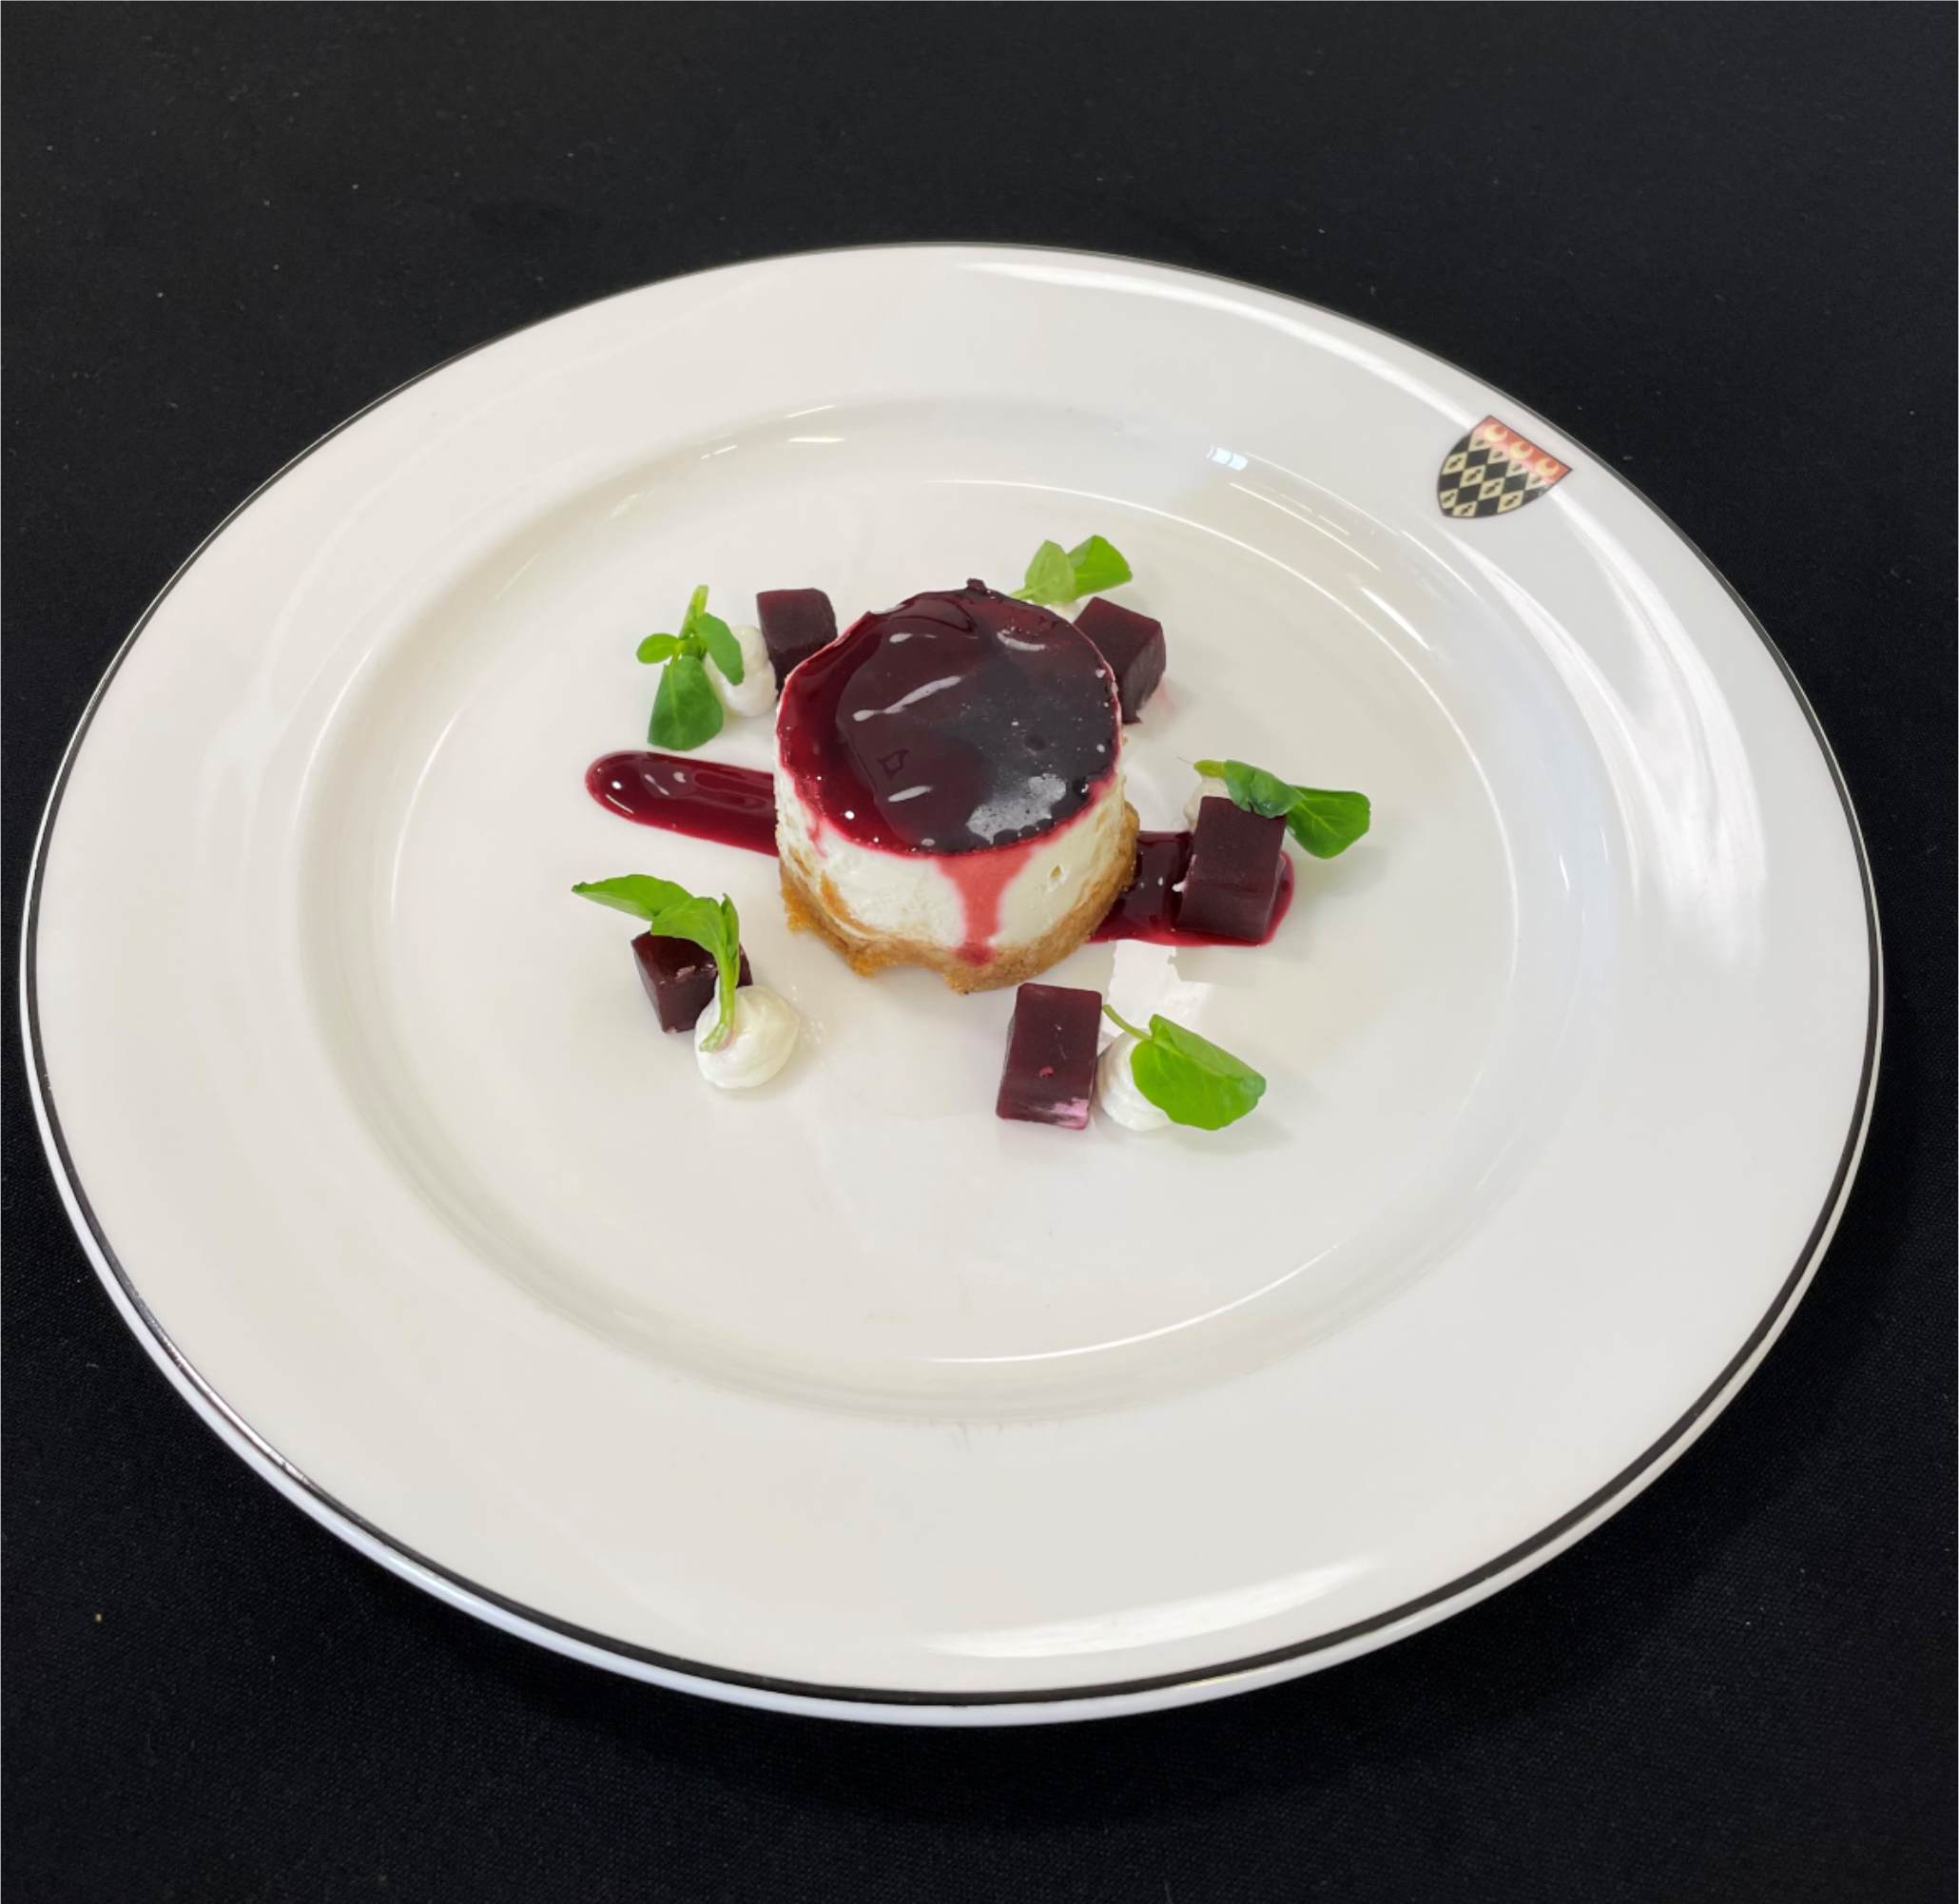 Beetroot and goat's cheese cake (v) served with a beetroot and watercress salad